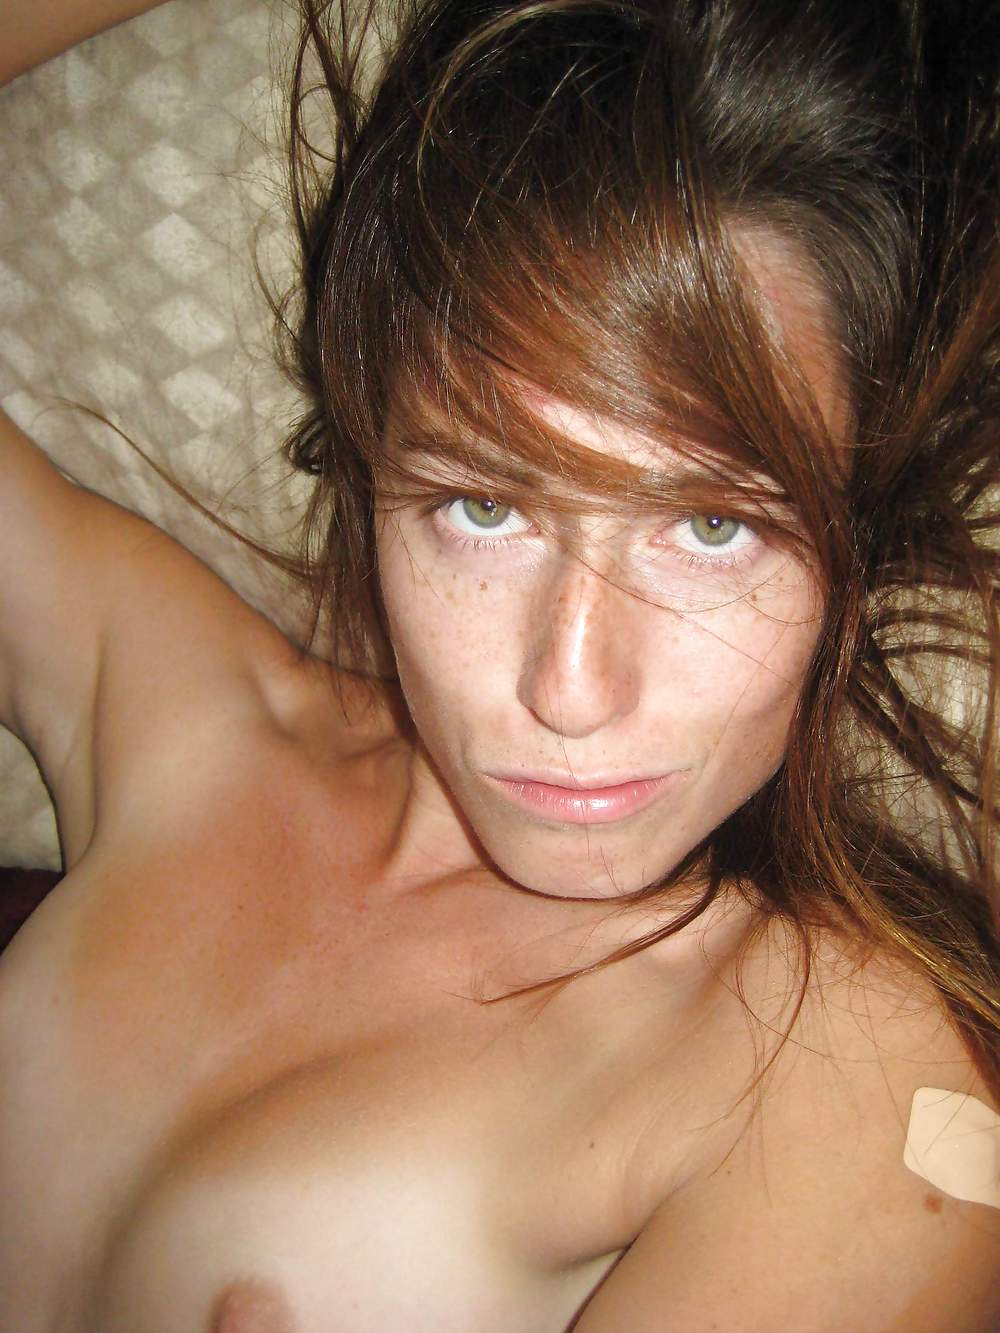 Free selfshot in bed photos